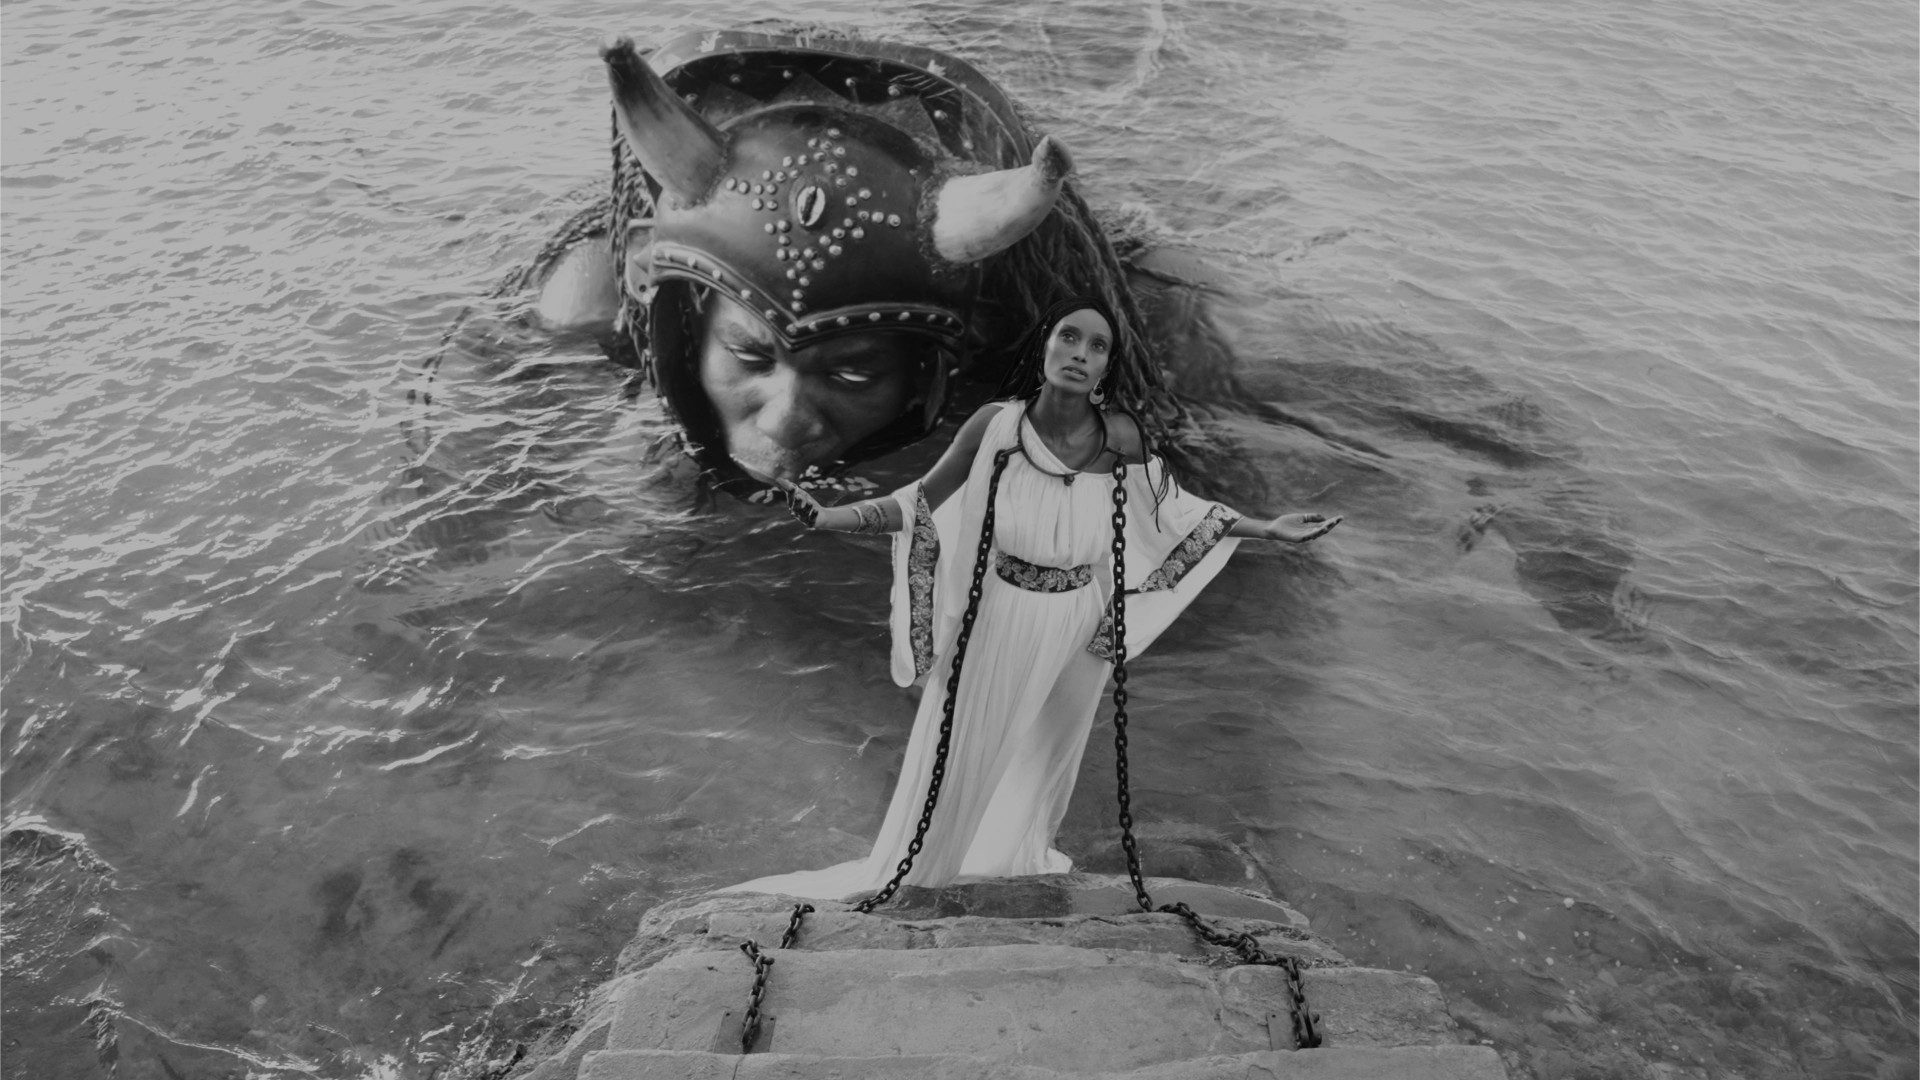 A black-and-white photograph showing a stormy sea, in which a woman stands chained to a rock while a monstrous creature with a human face and horns looms behind her